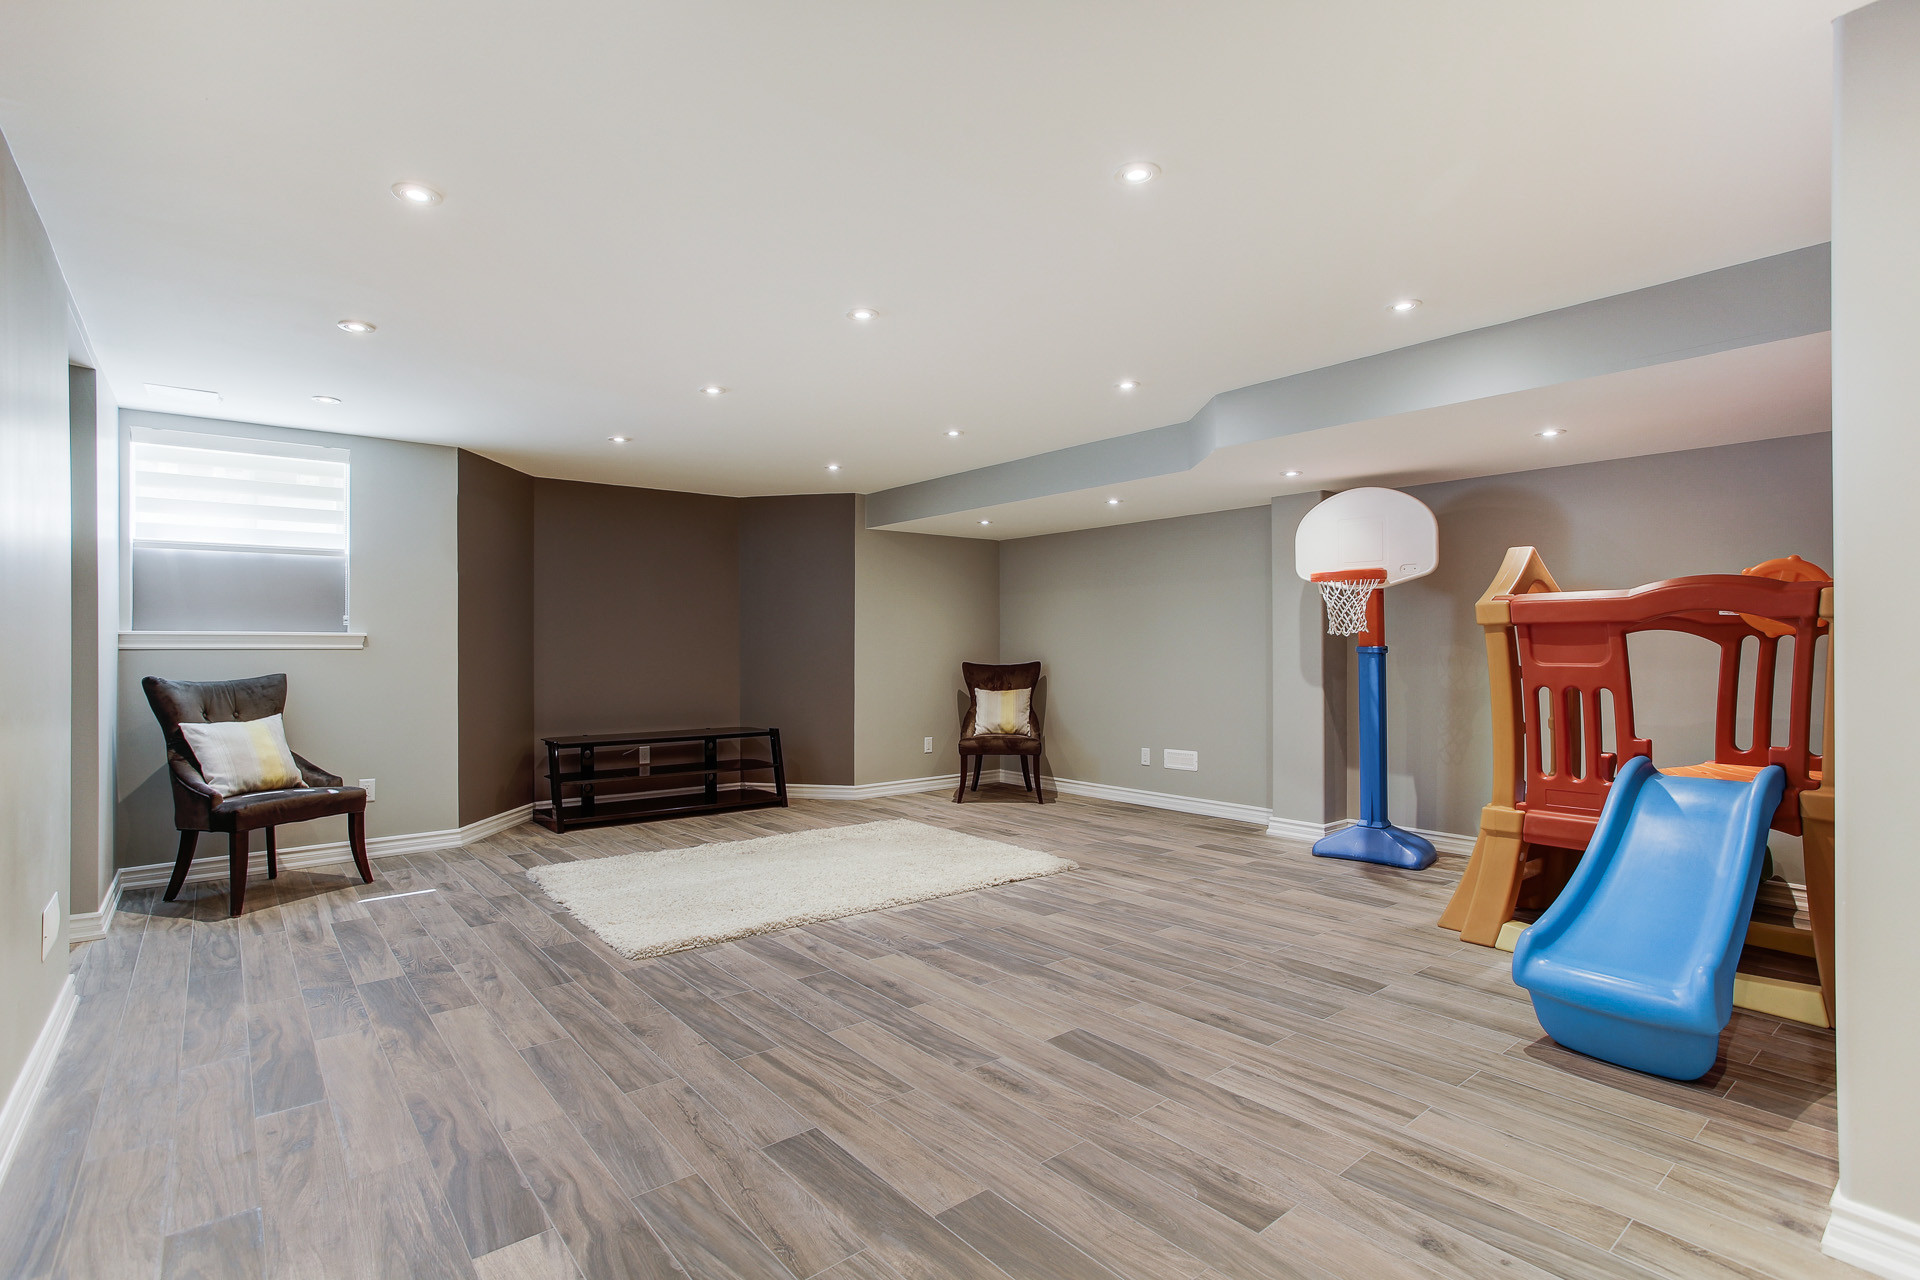 18 Recommended the Hardwood Flooring Stores Markham On 2024 free download the hardwood flooring stores markham on of 49 beckett avenue markham realty tours in back to gallery